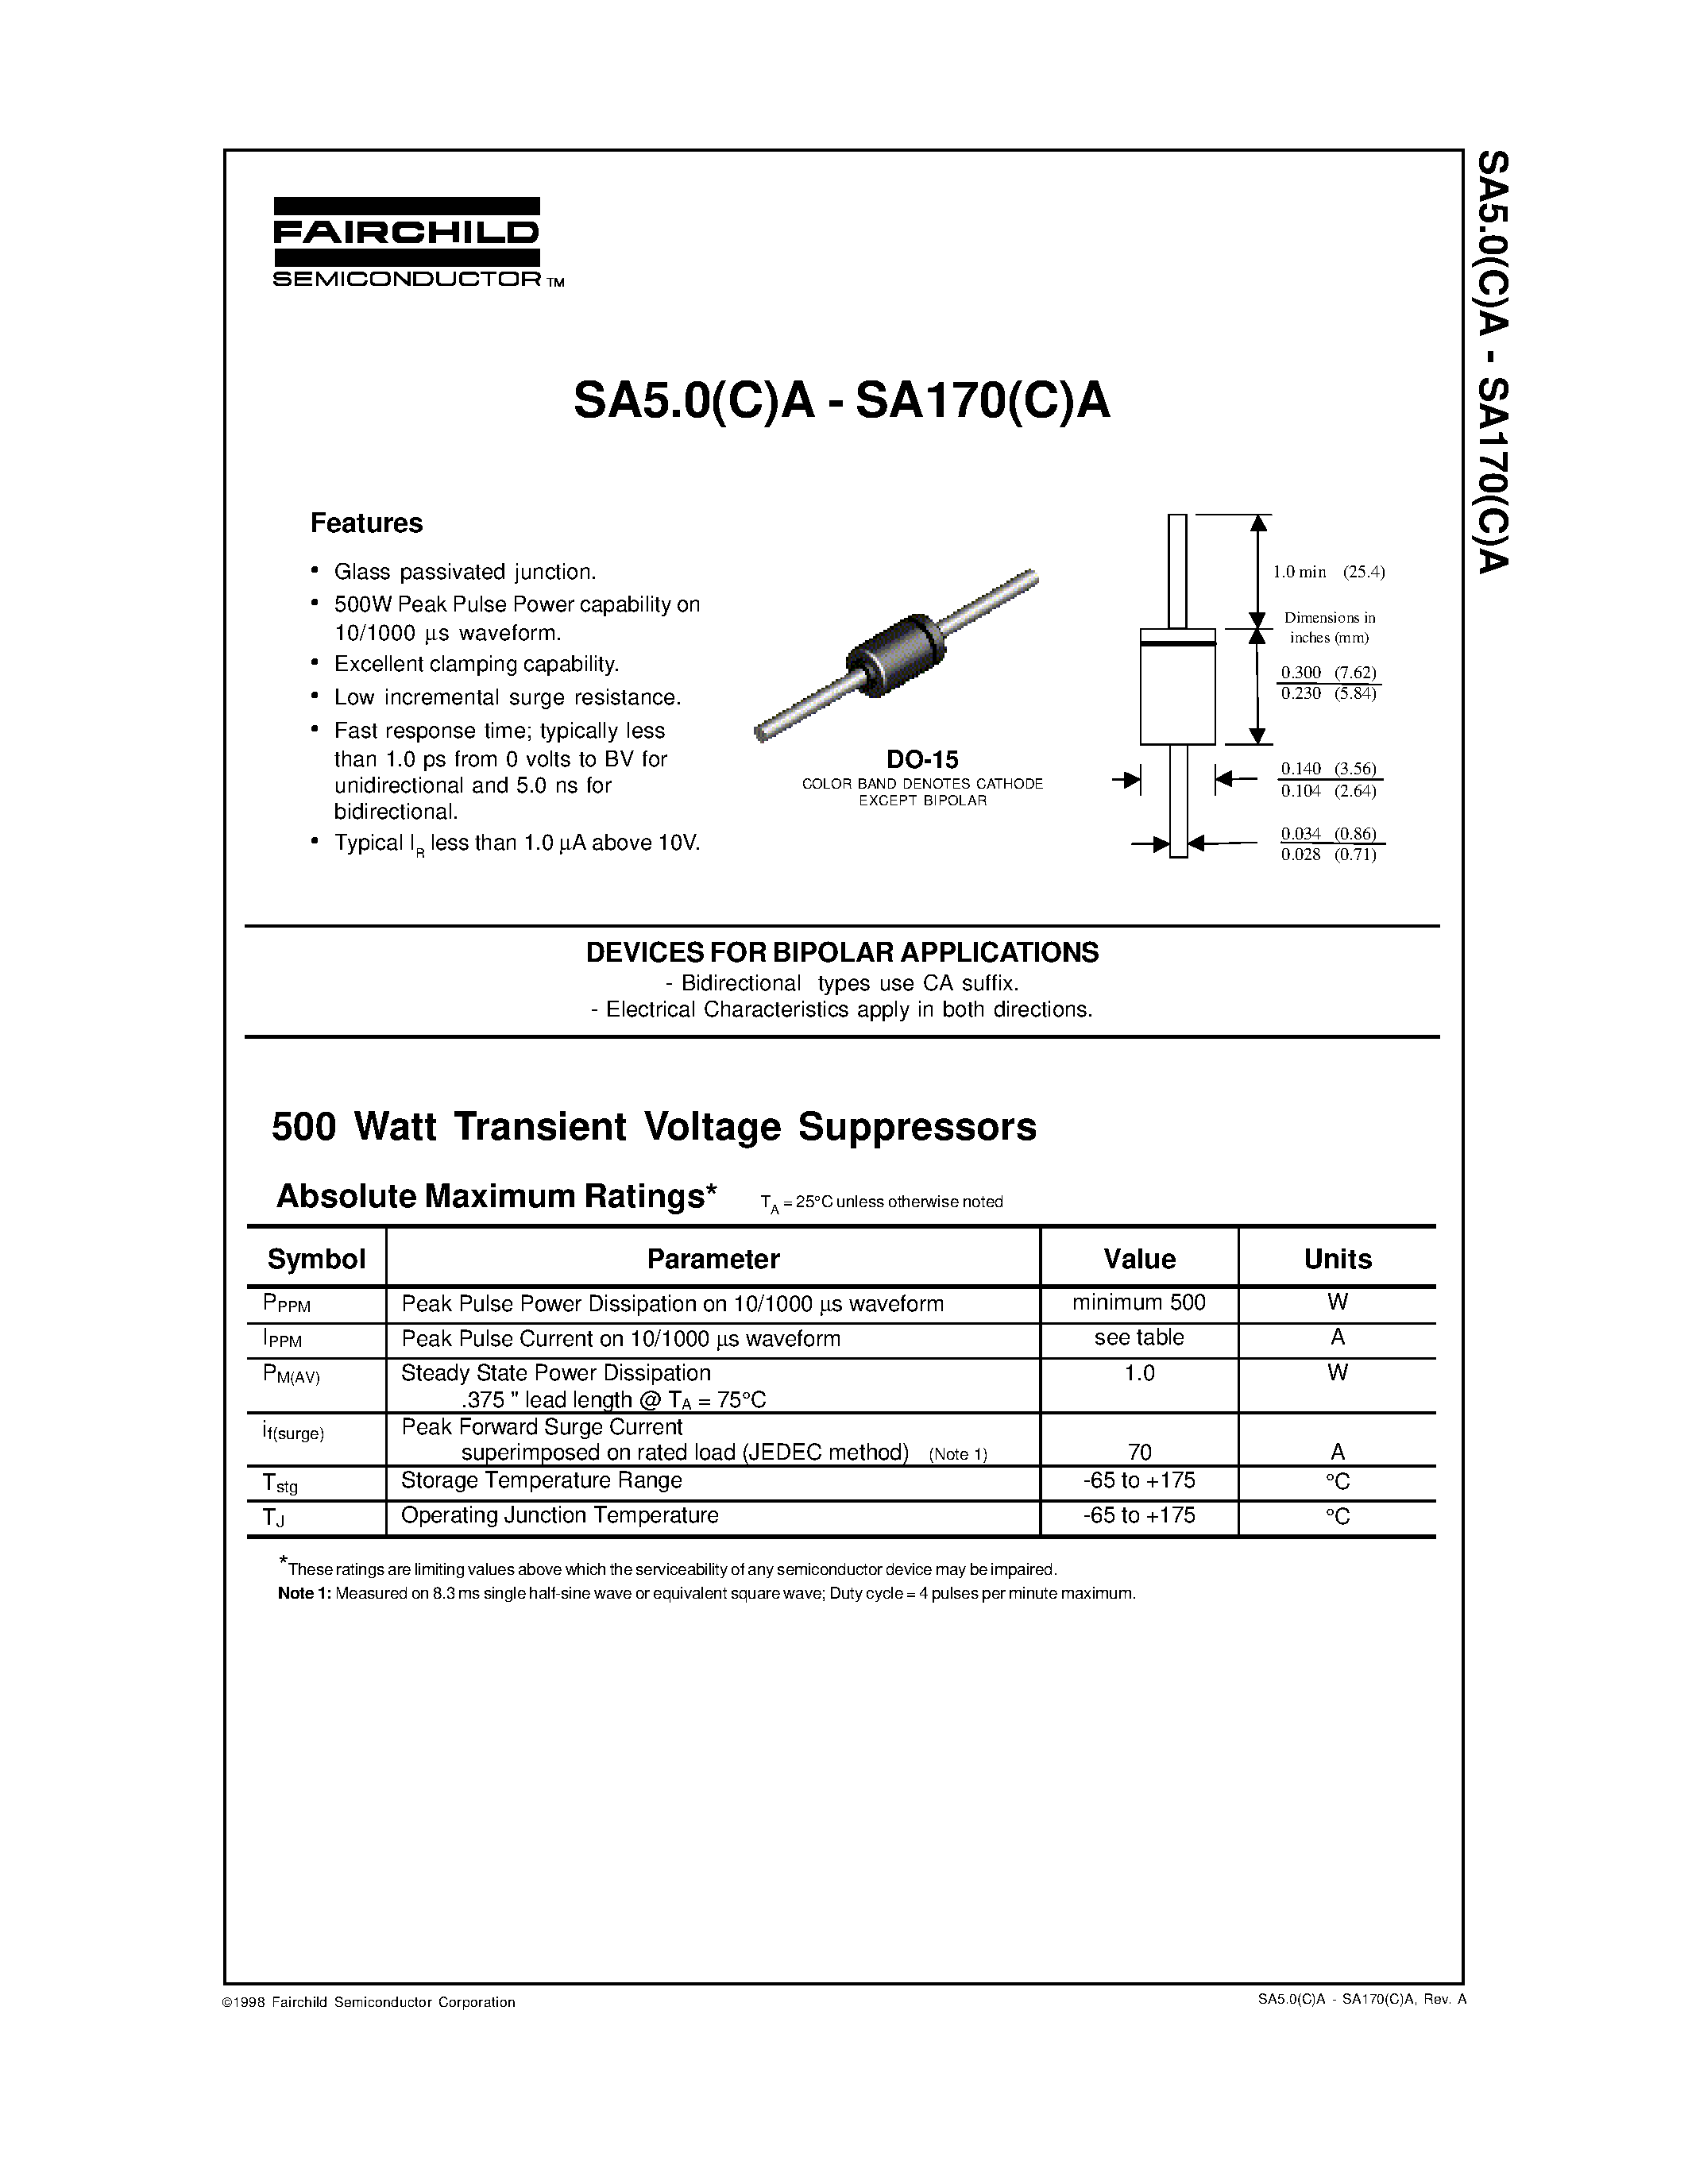 Datasheet SA36(C)A - DEVICES FOR BIPOLAR APPLICATIONS page 1